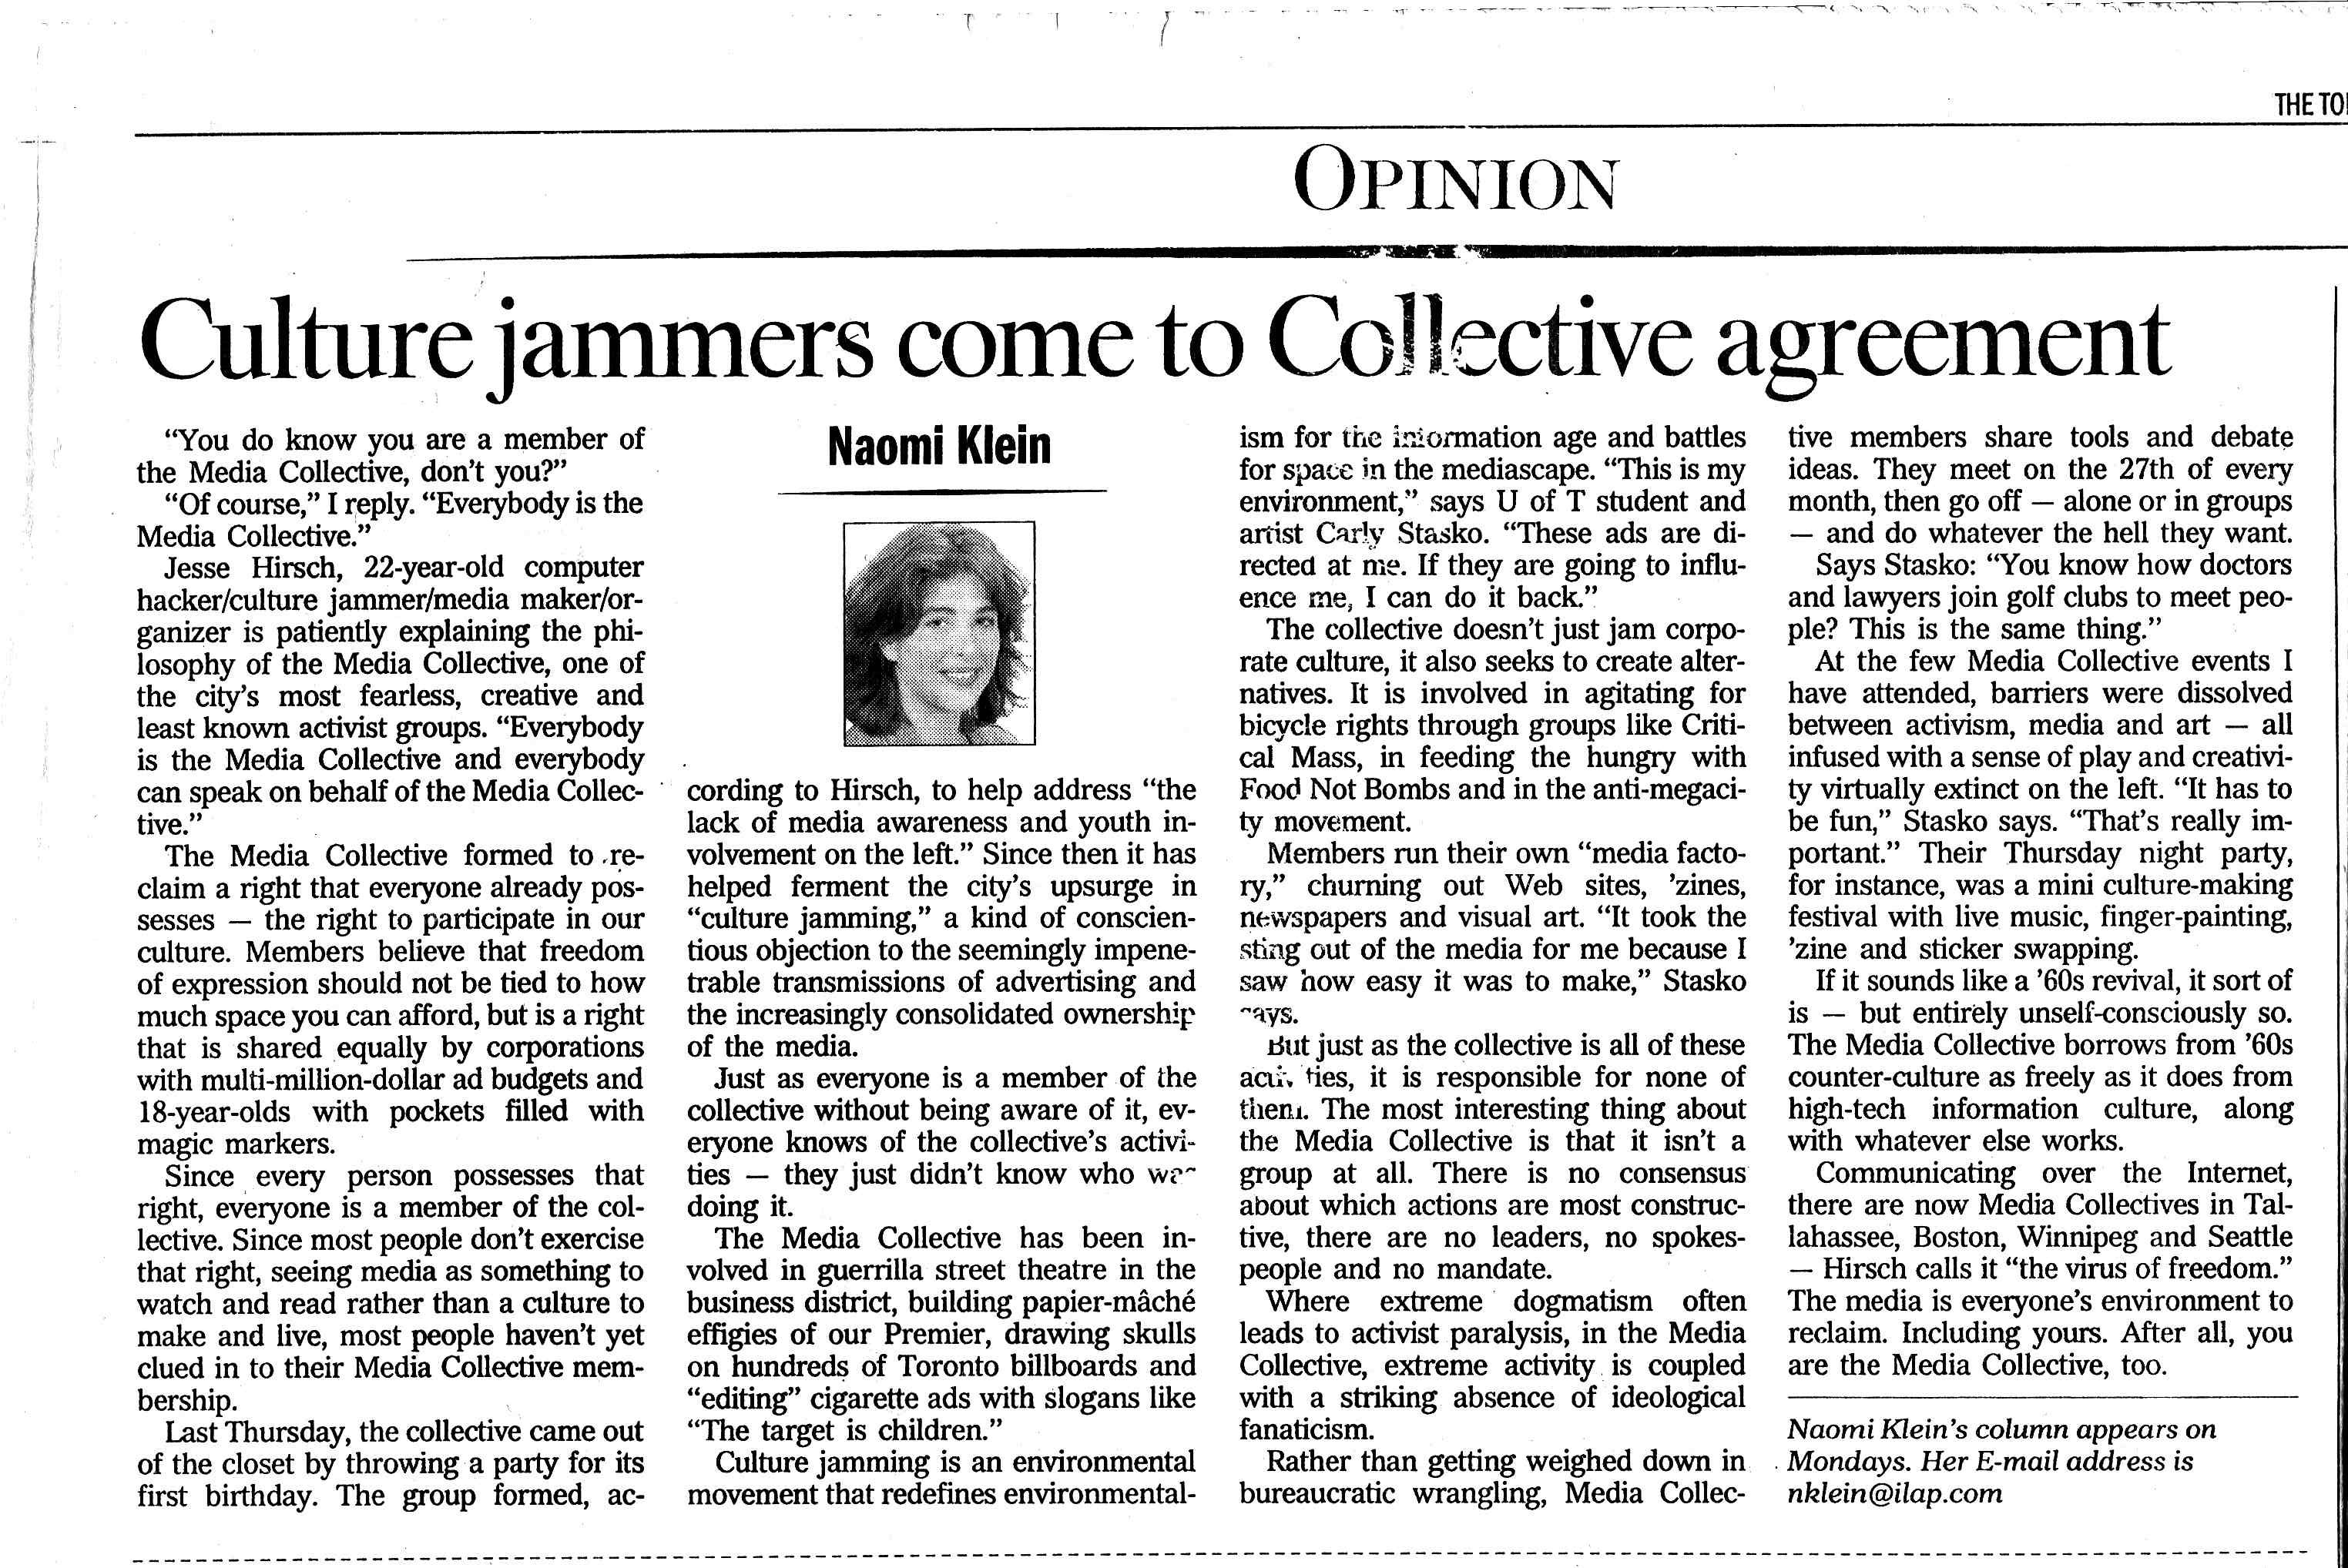 “Culture jammers come to Collective agreement” in The Toronto Star